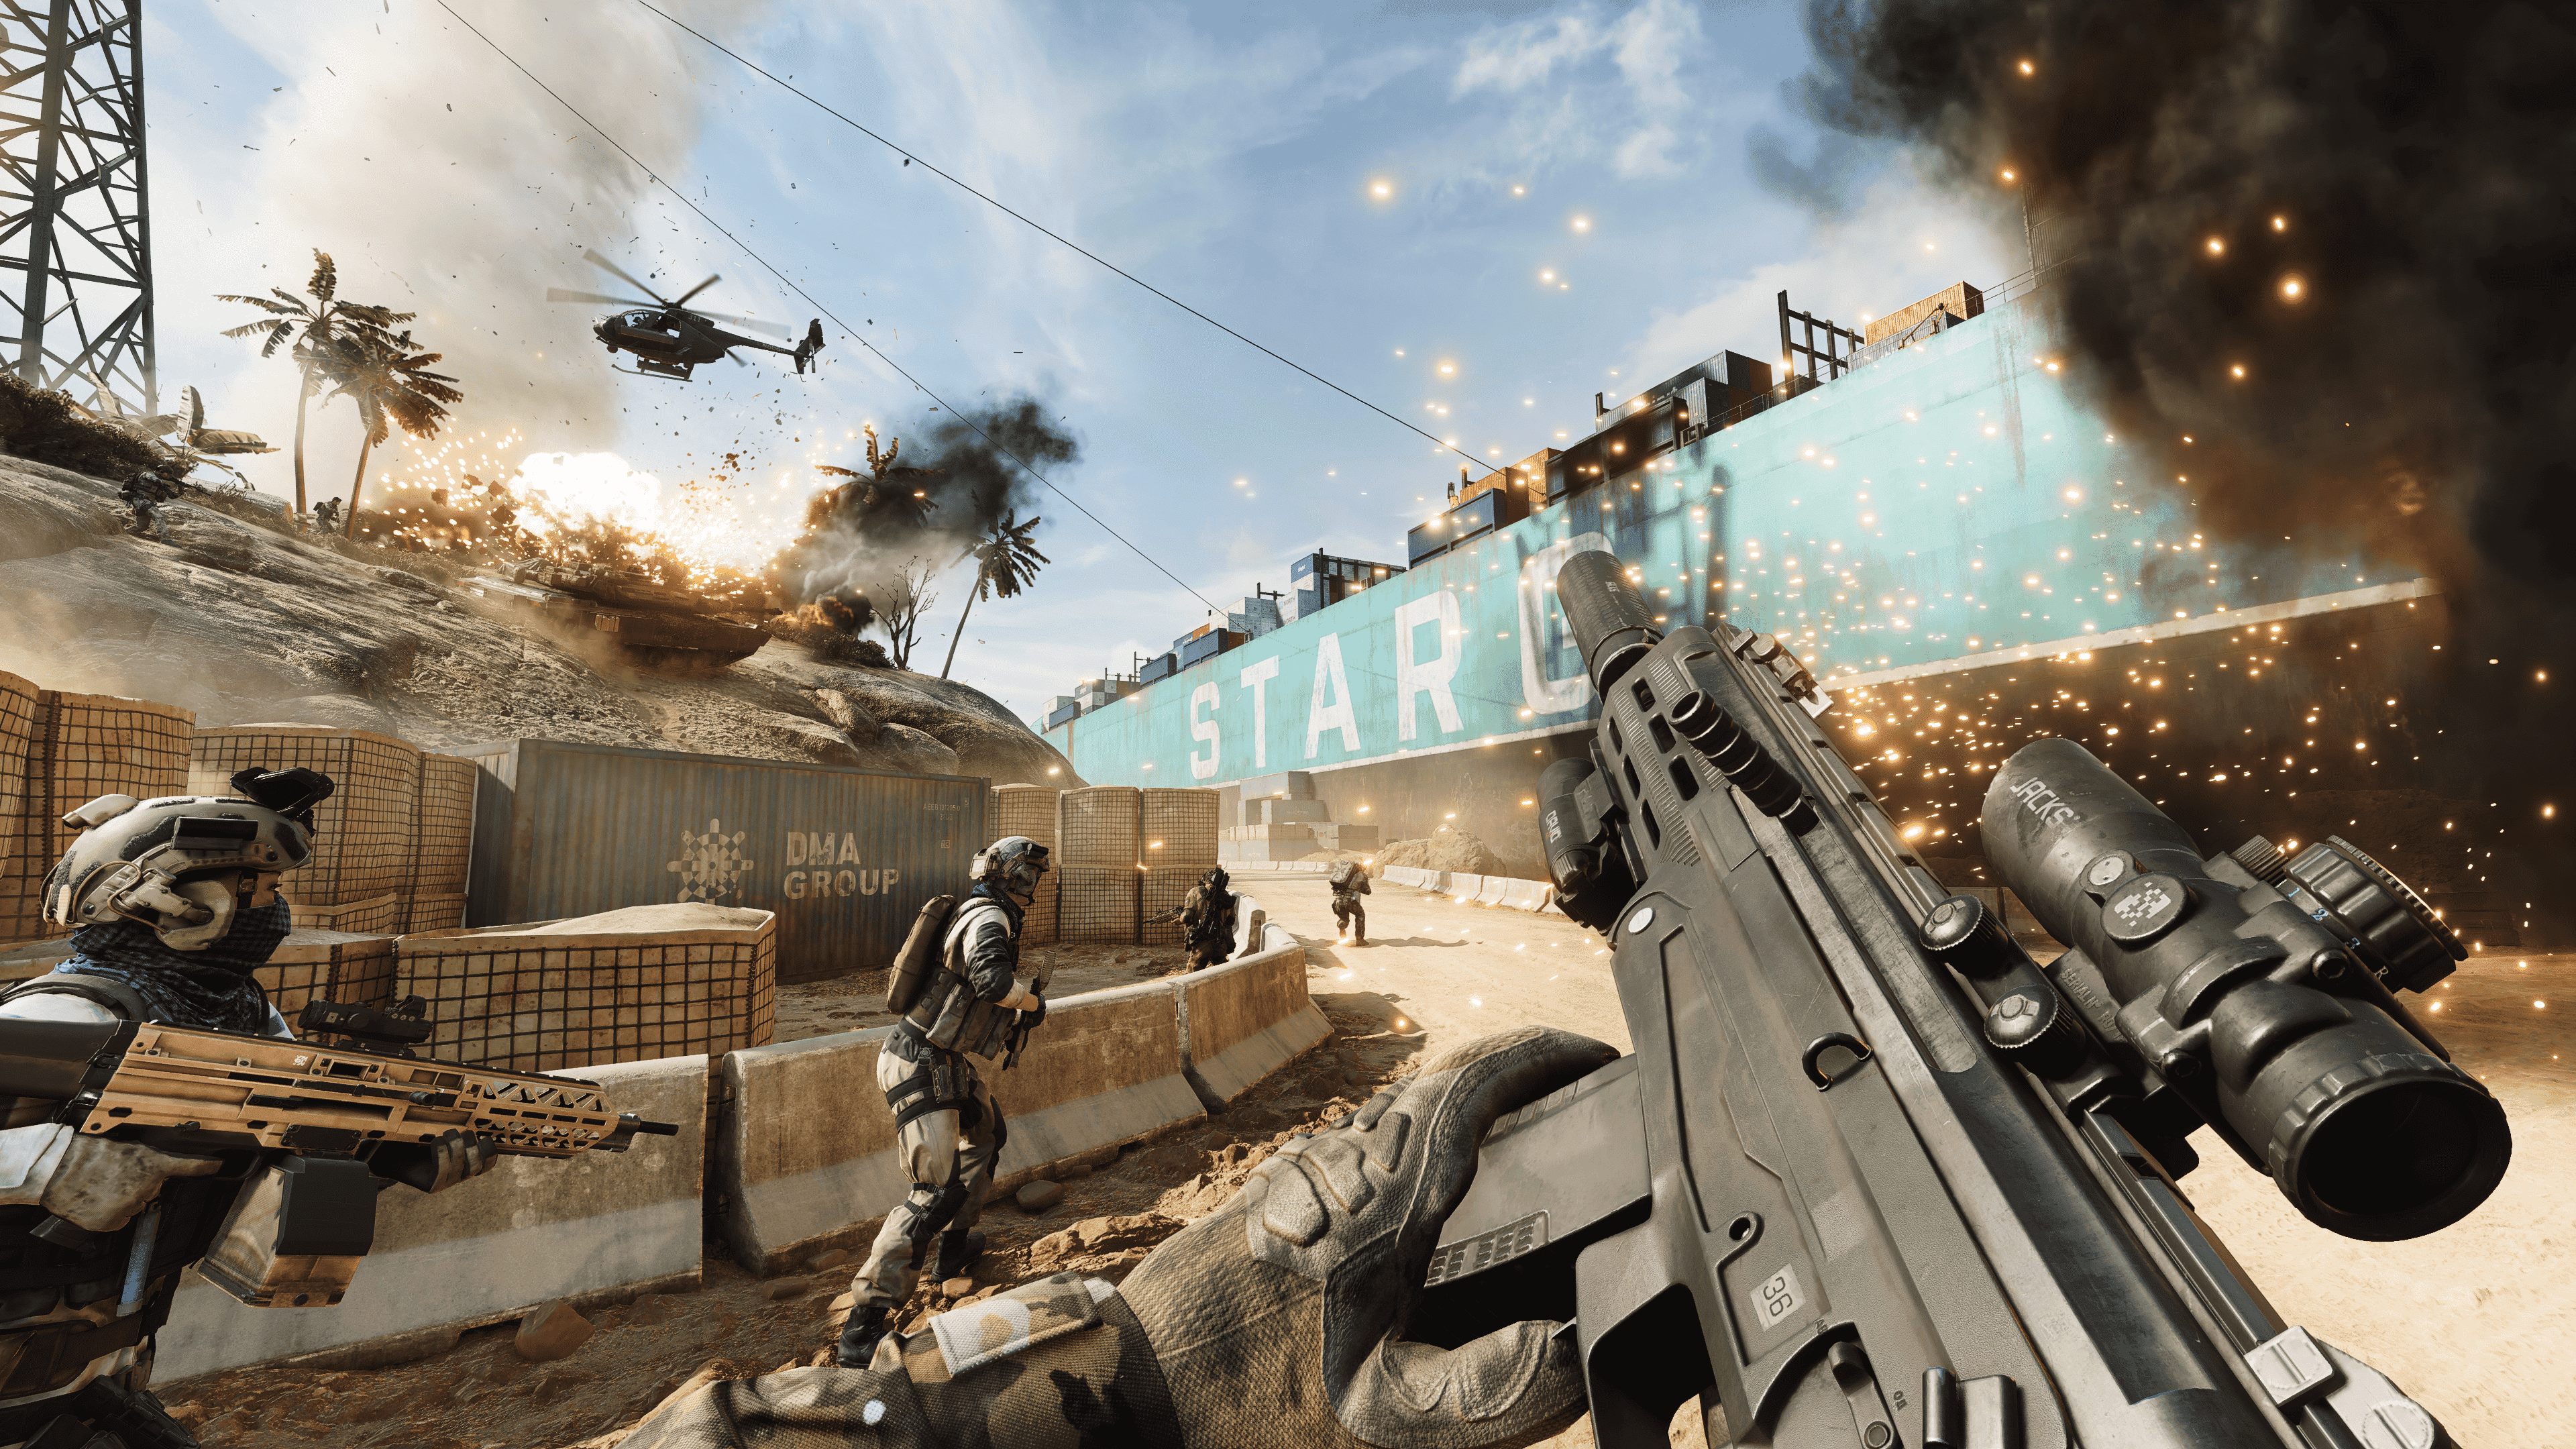 Battlefield 2042 Update 1.16 Released for Season 2 This August 29